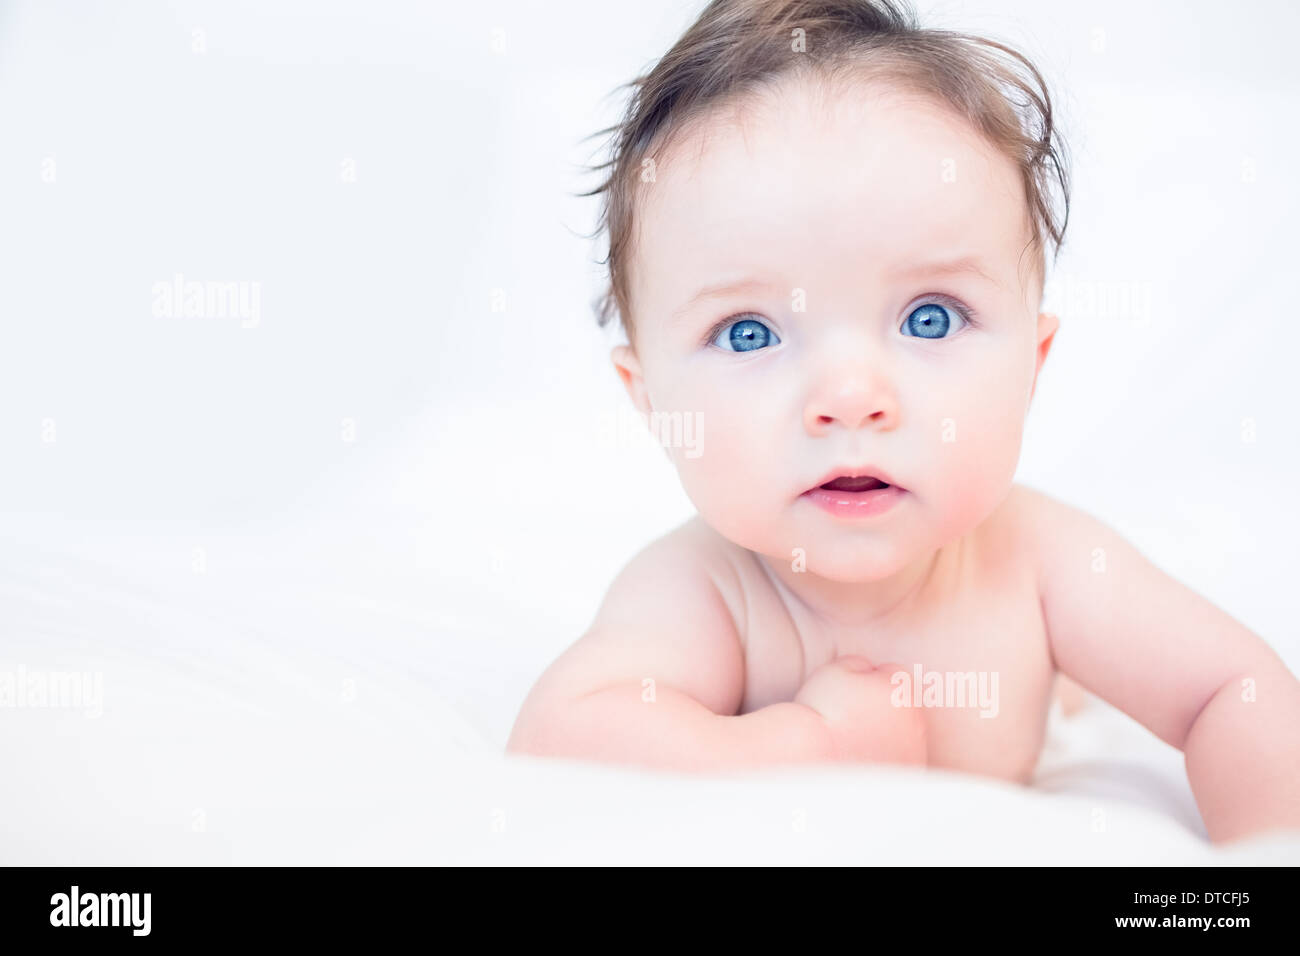 Lovely baby with blue eyes in bed Stock Photo